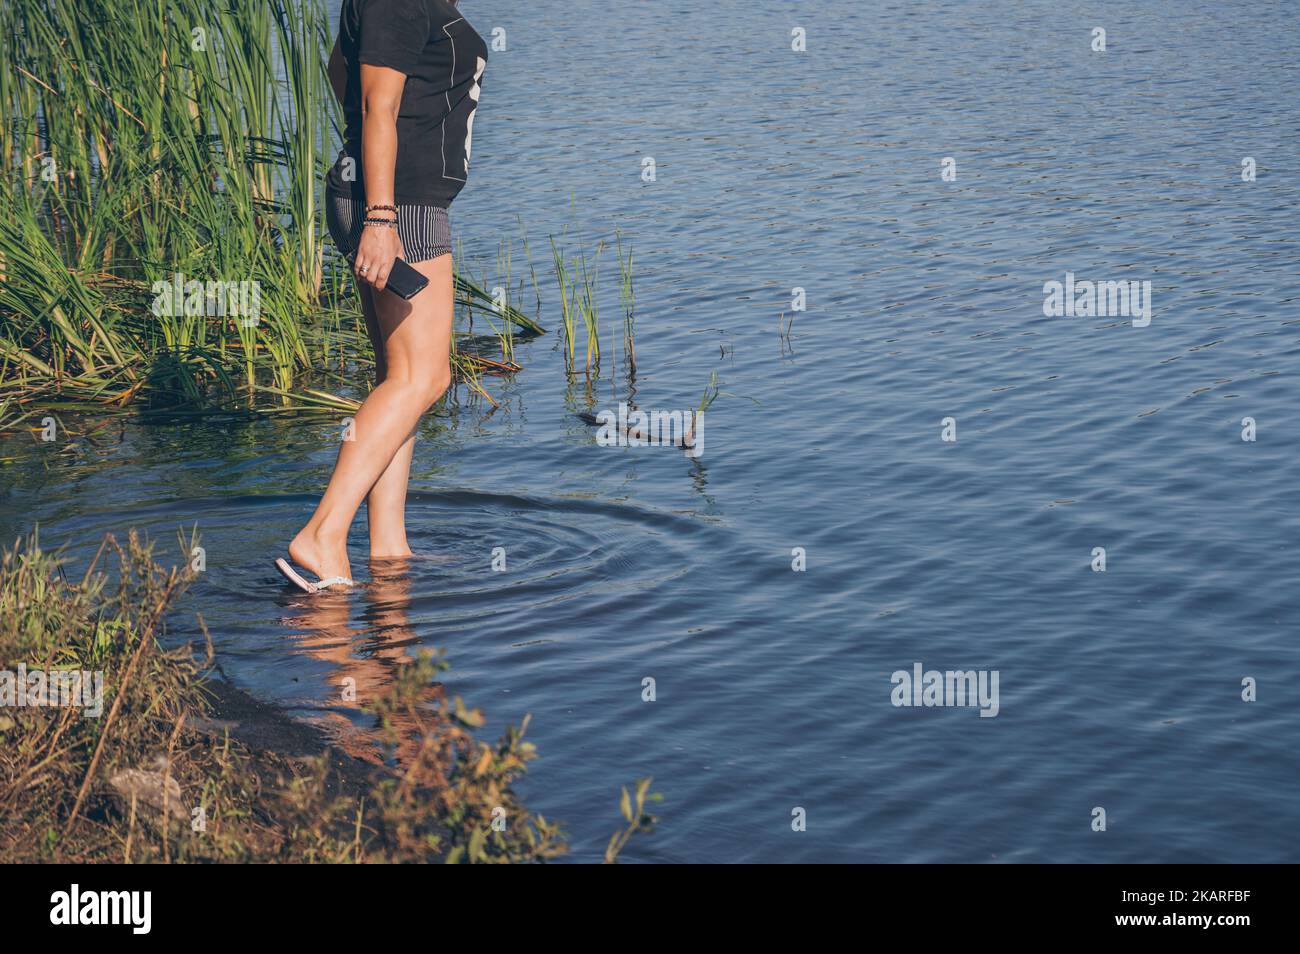 Legs of girl in shorts entering river, circles on water Stock Photo